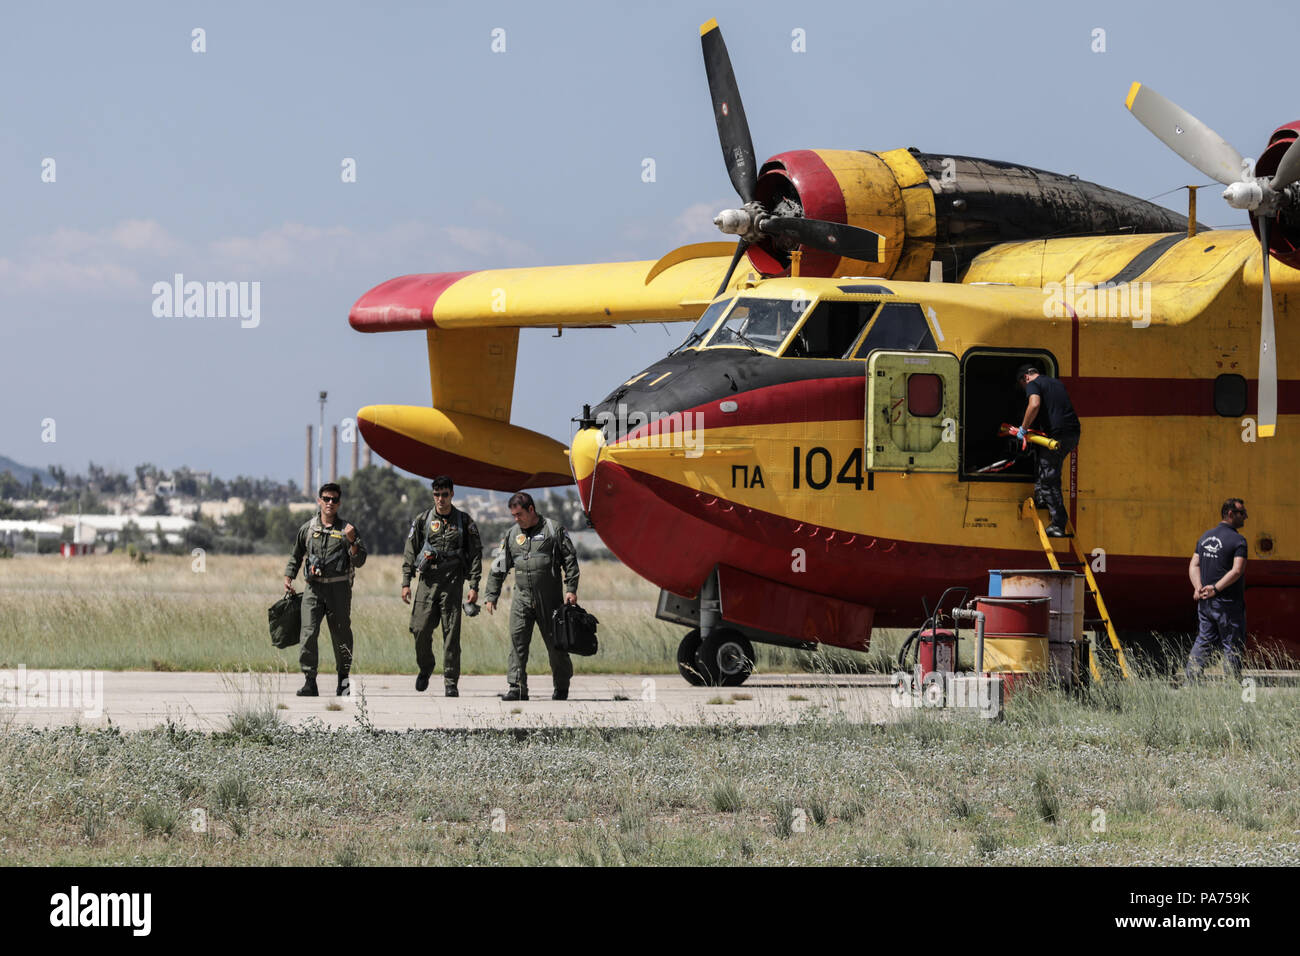 Athens, Greece. 20th July, 2018. Pilots leave a firefighting aircraft at Elefsina Air Base, Athens, Greece, on July 20, 2018. The 355 Tactical Transport Squadron was established in 1947 to fight wildfires. Credit: Lefteris Partsalis/Xinhua/Alamy Live News Stock Photo